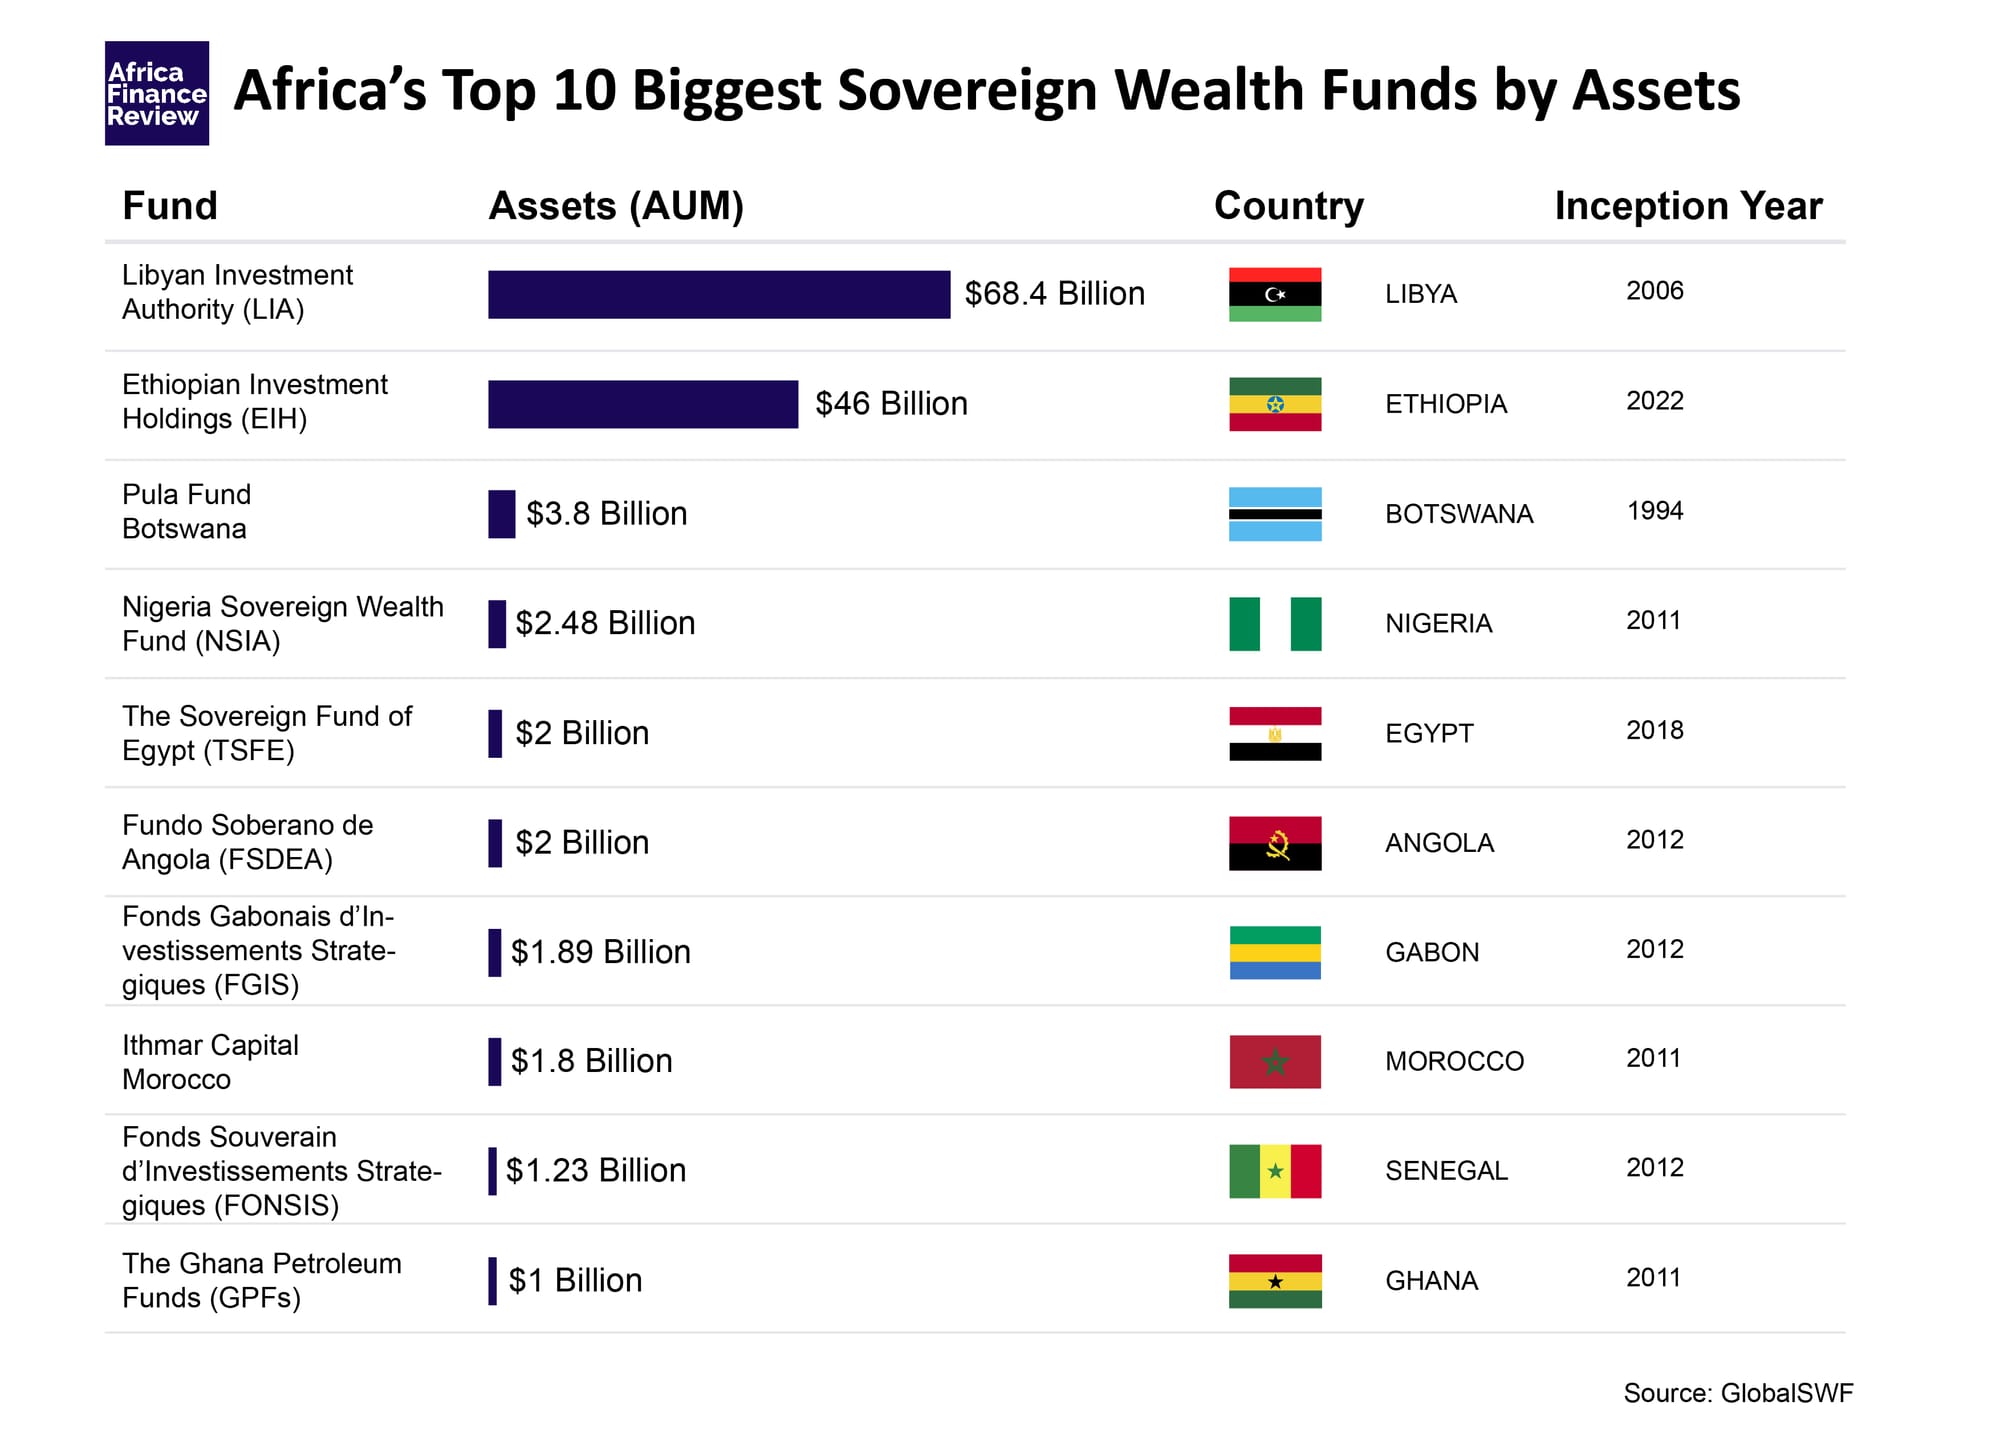 The Rise of Africa's Sovereign Wealth Funds